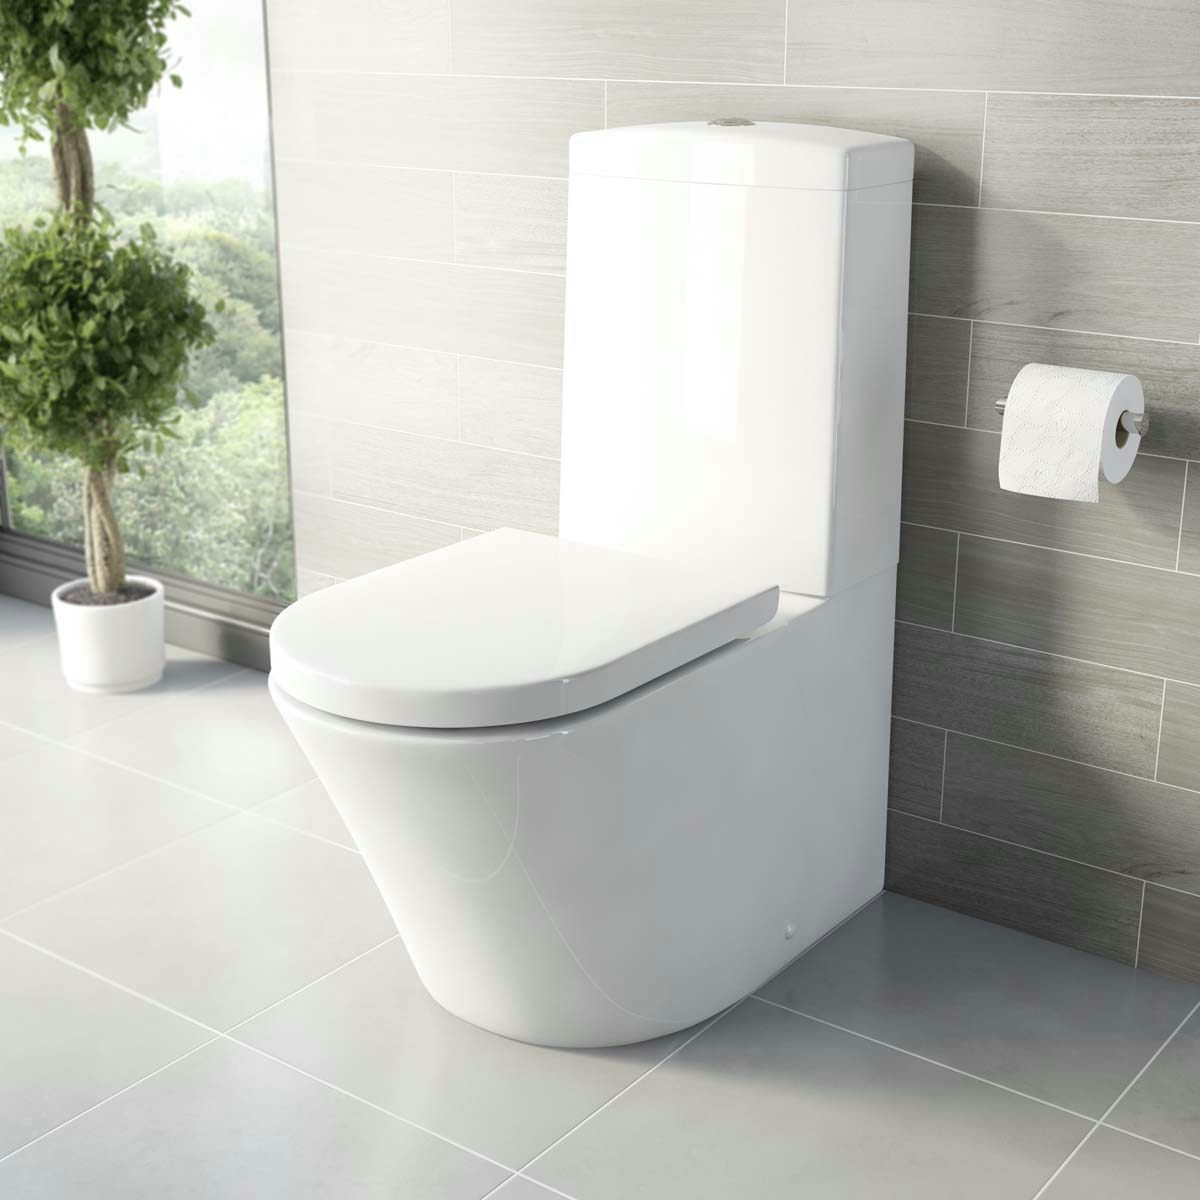 Tate close coupled toilet with luxury soft close toilet seat